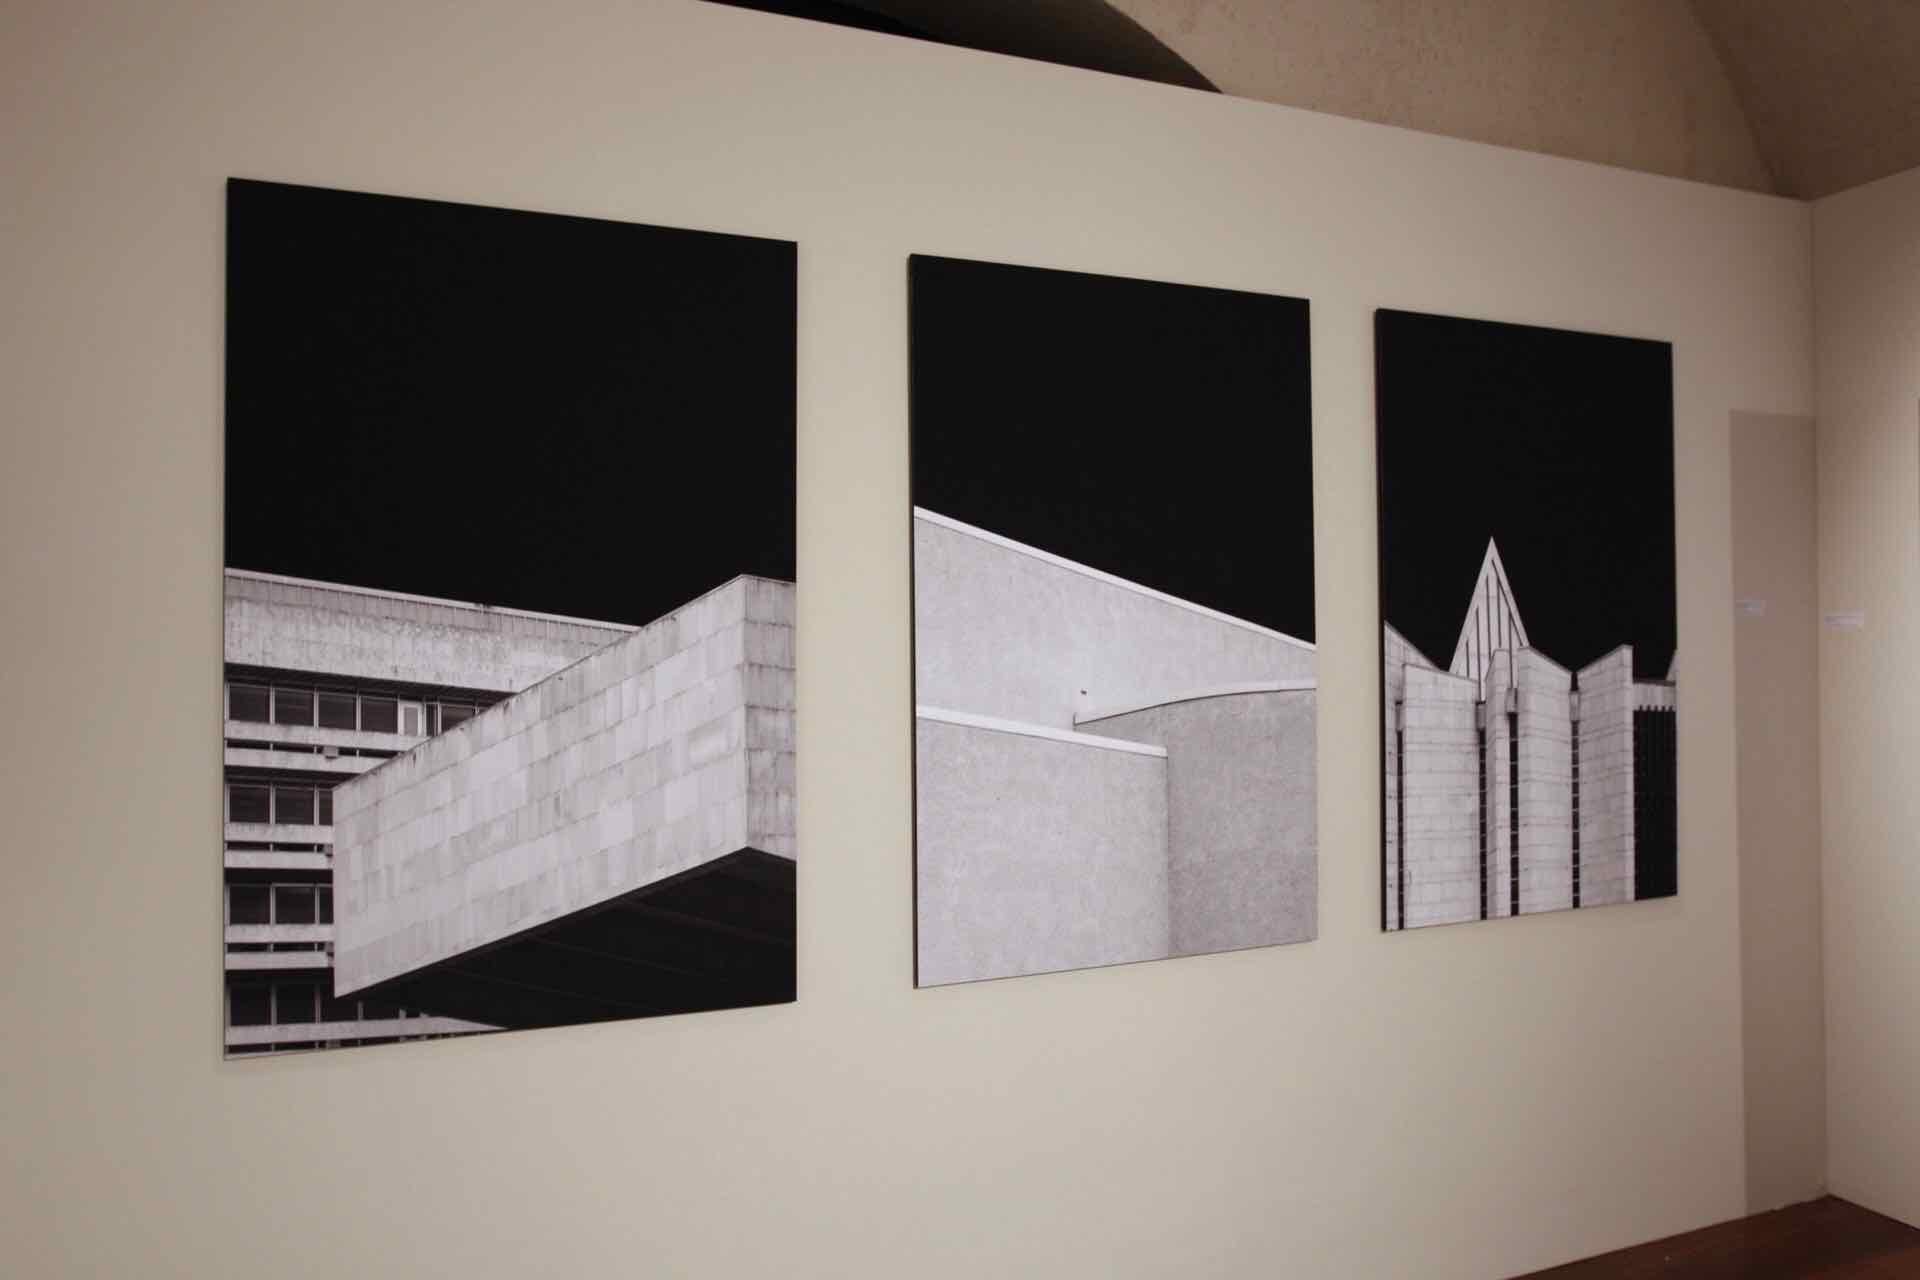 Concrete Evidence (Main Library 1967 and Gordon Aikman Lecture Theatre 1970, Edinburgh University)

This is a limited edition photograph, printed on Fotospeed Matt Ultra 240 inkjet and mounted on board.  Each numbered print in the edition is signed